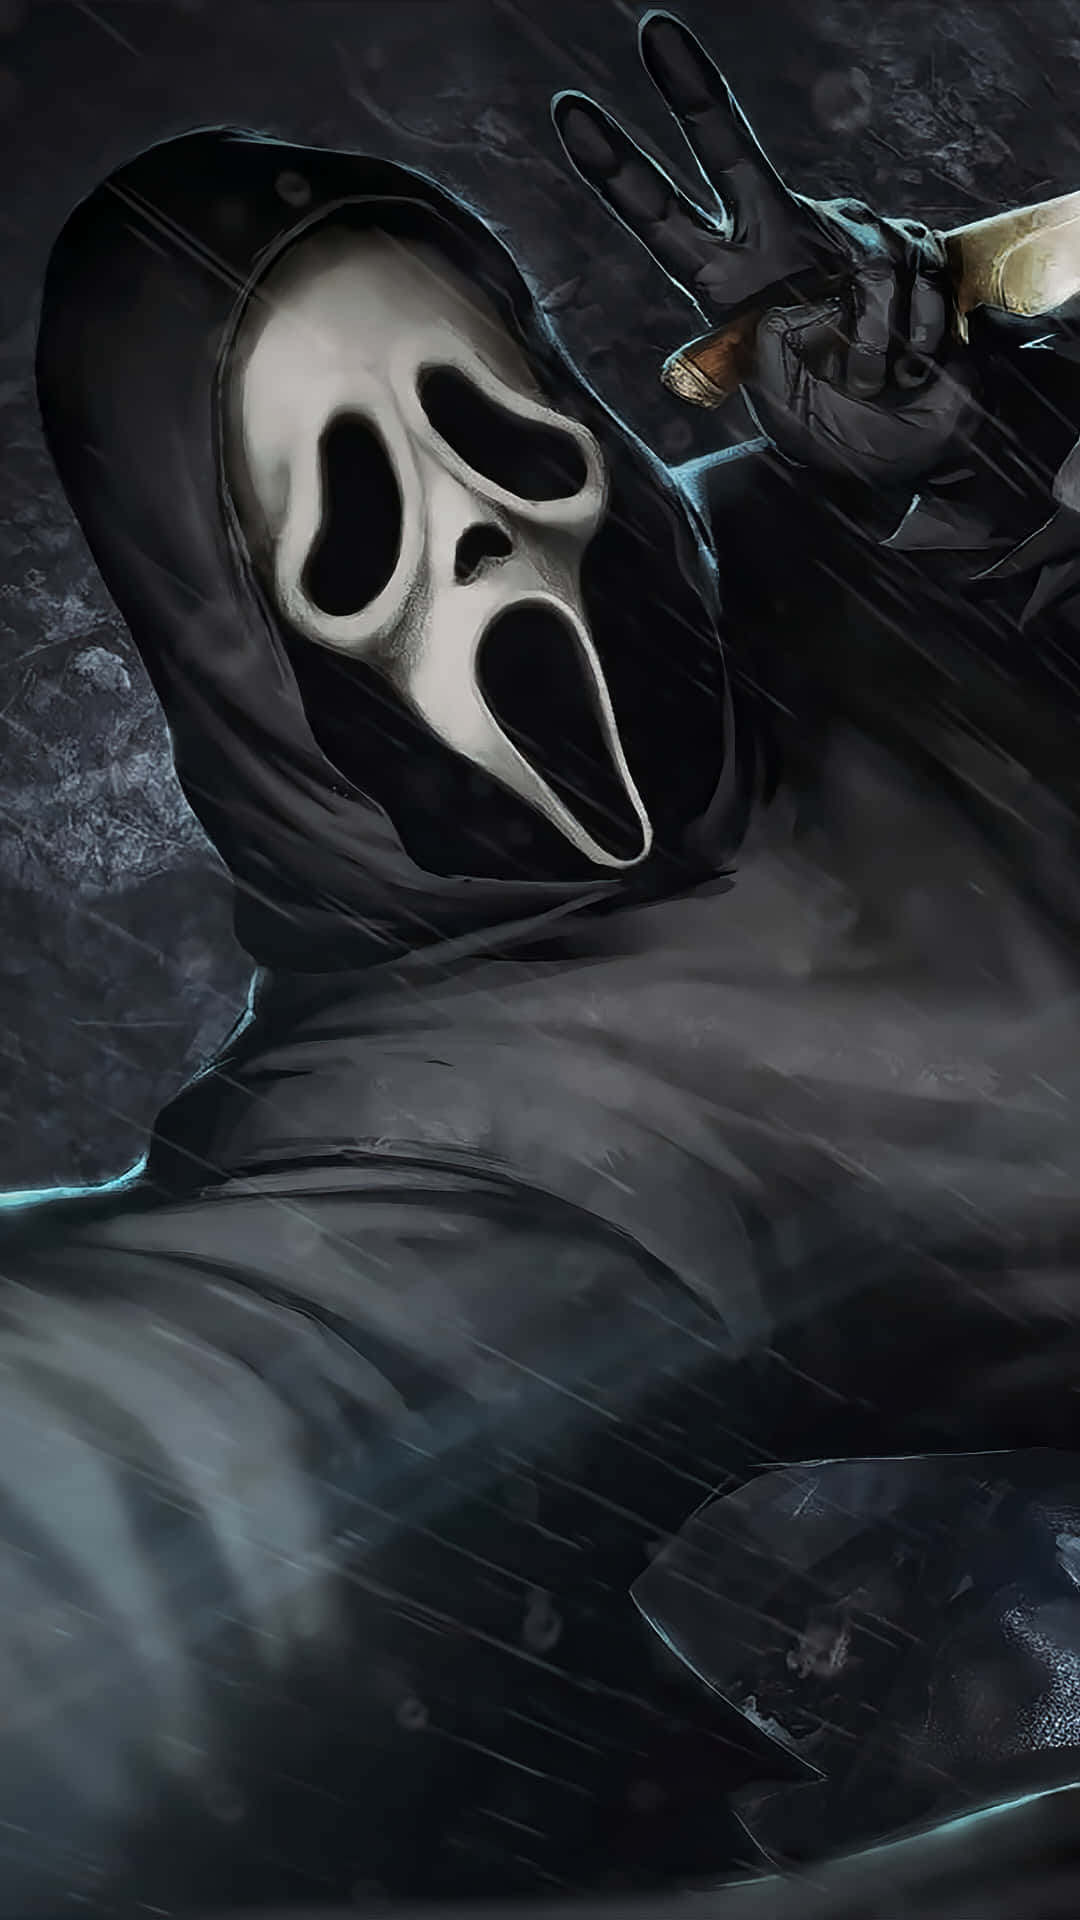 The Ghostface Mask: Icon of Horror